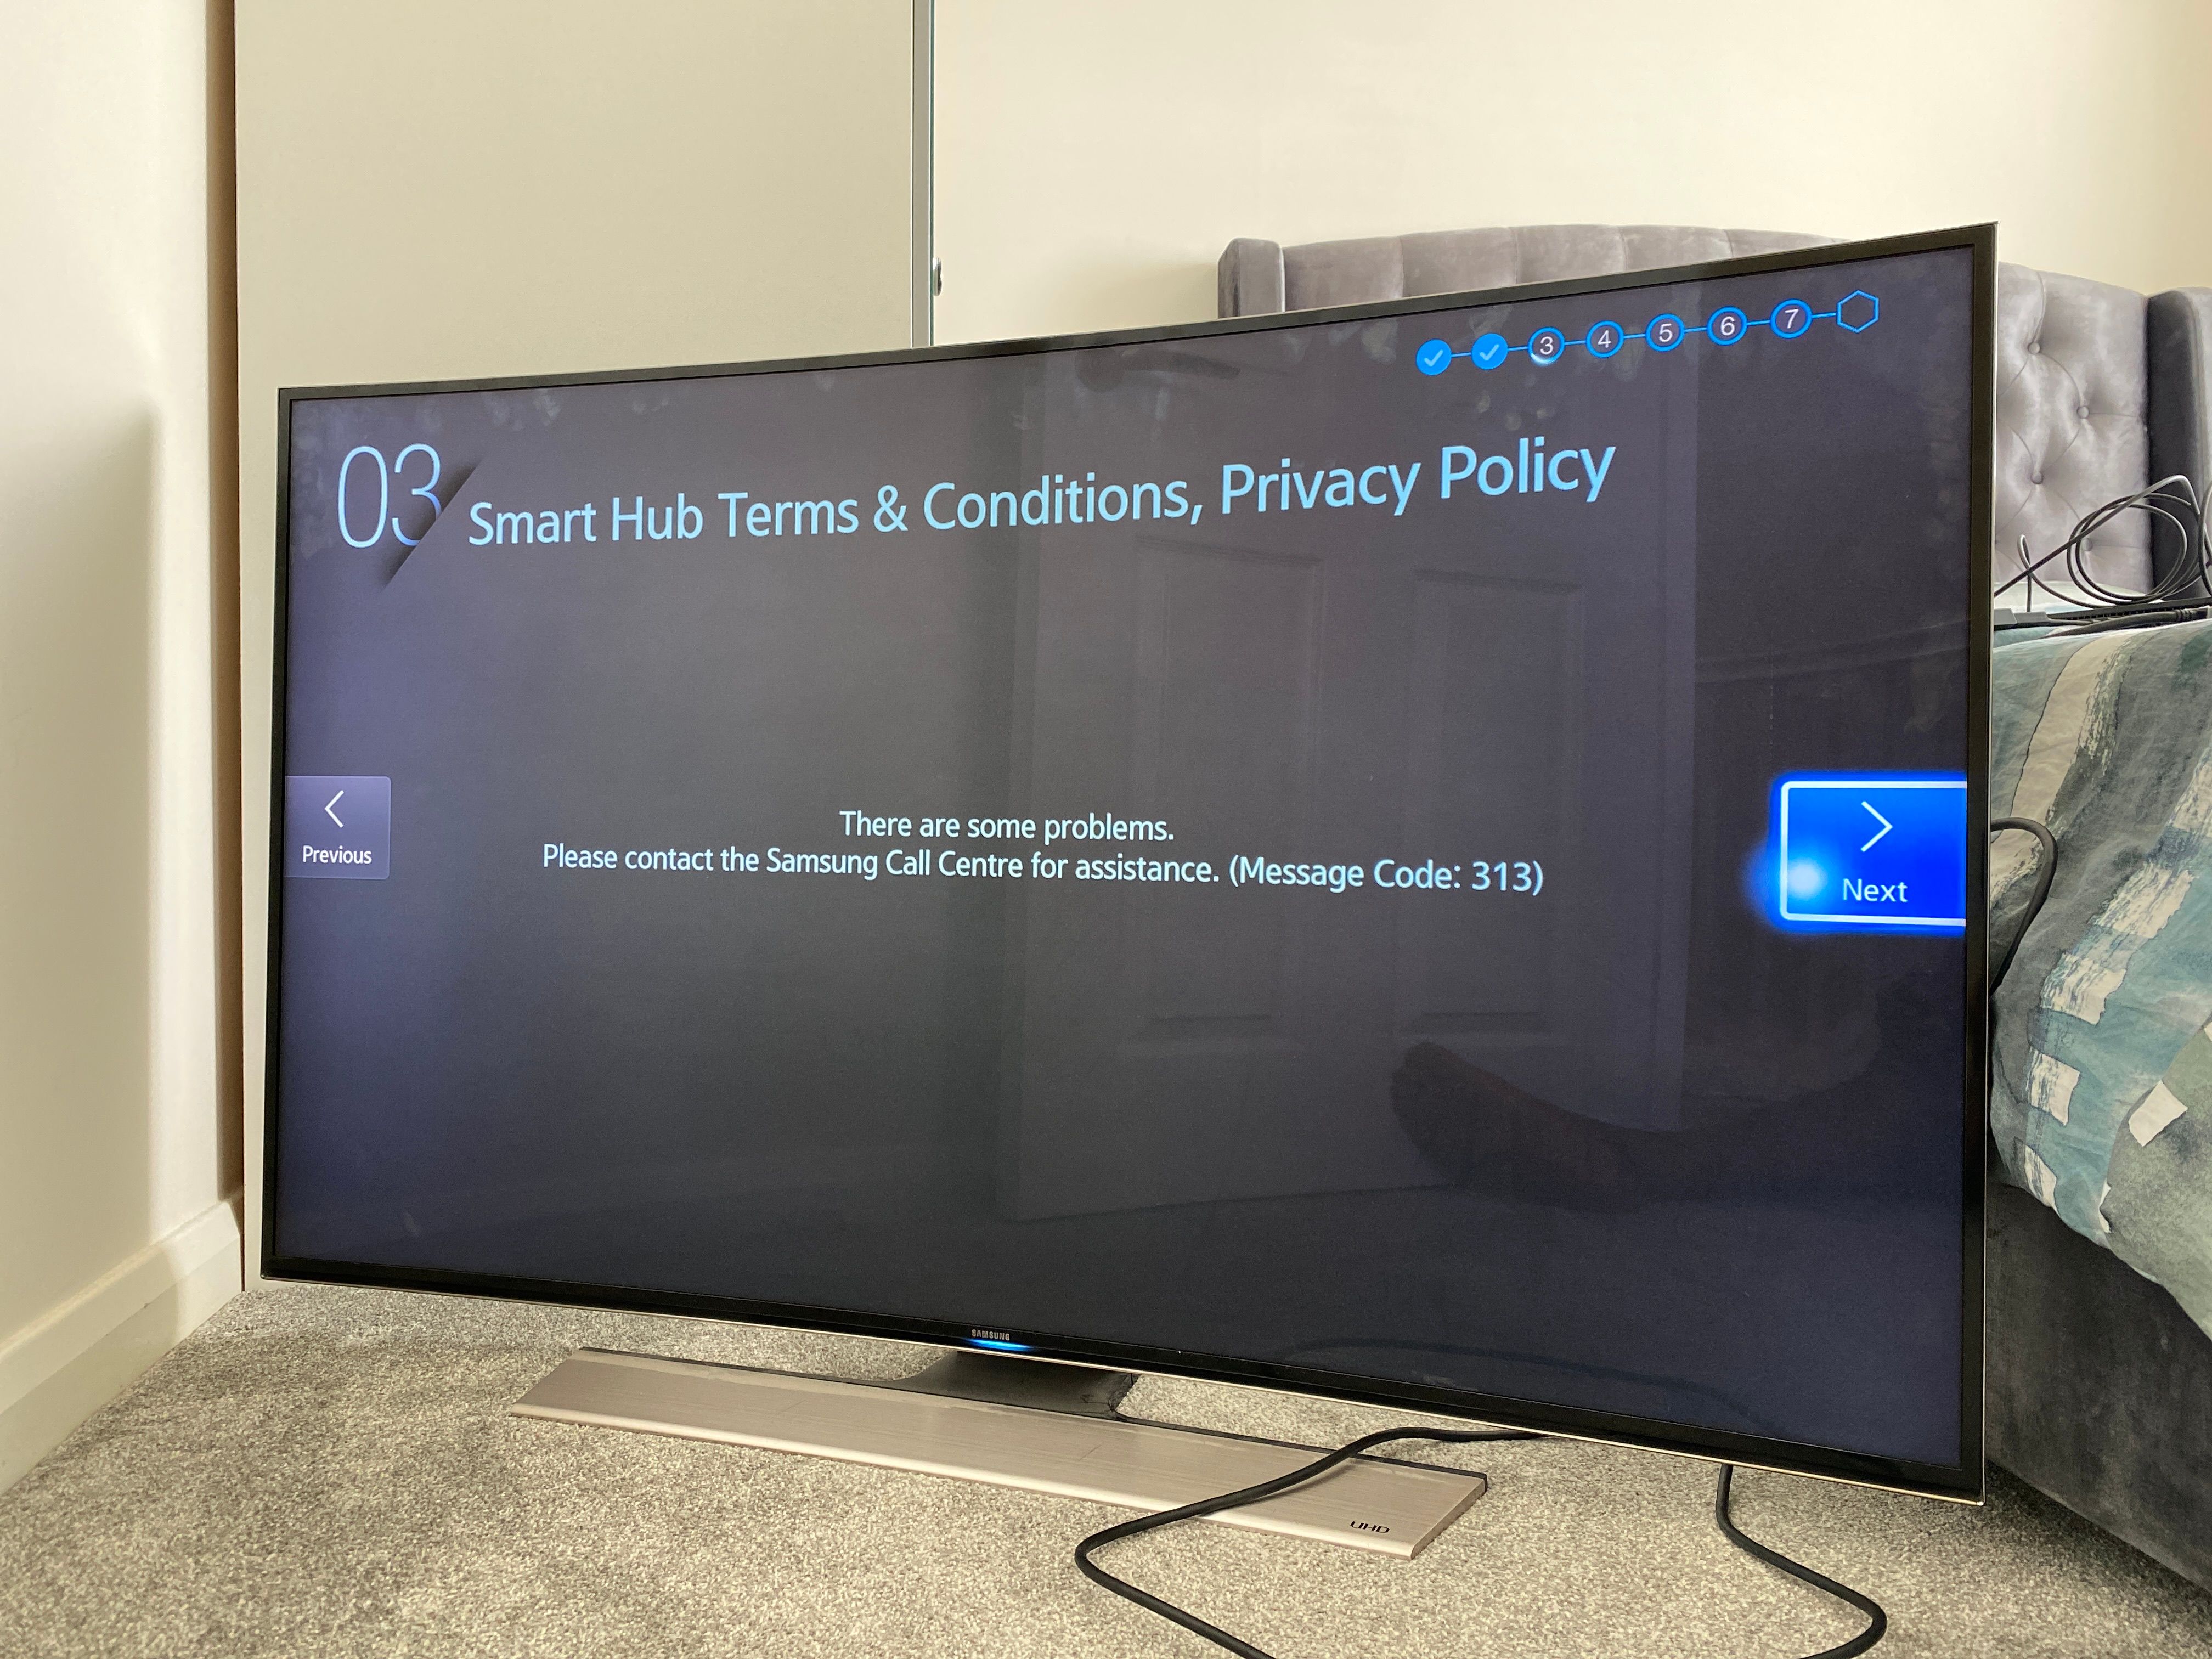 Samsung terms and conditions error - Samsung Community